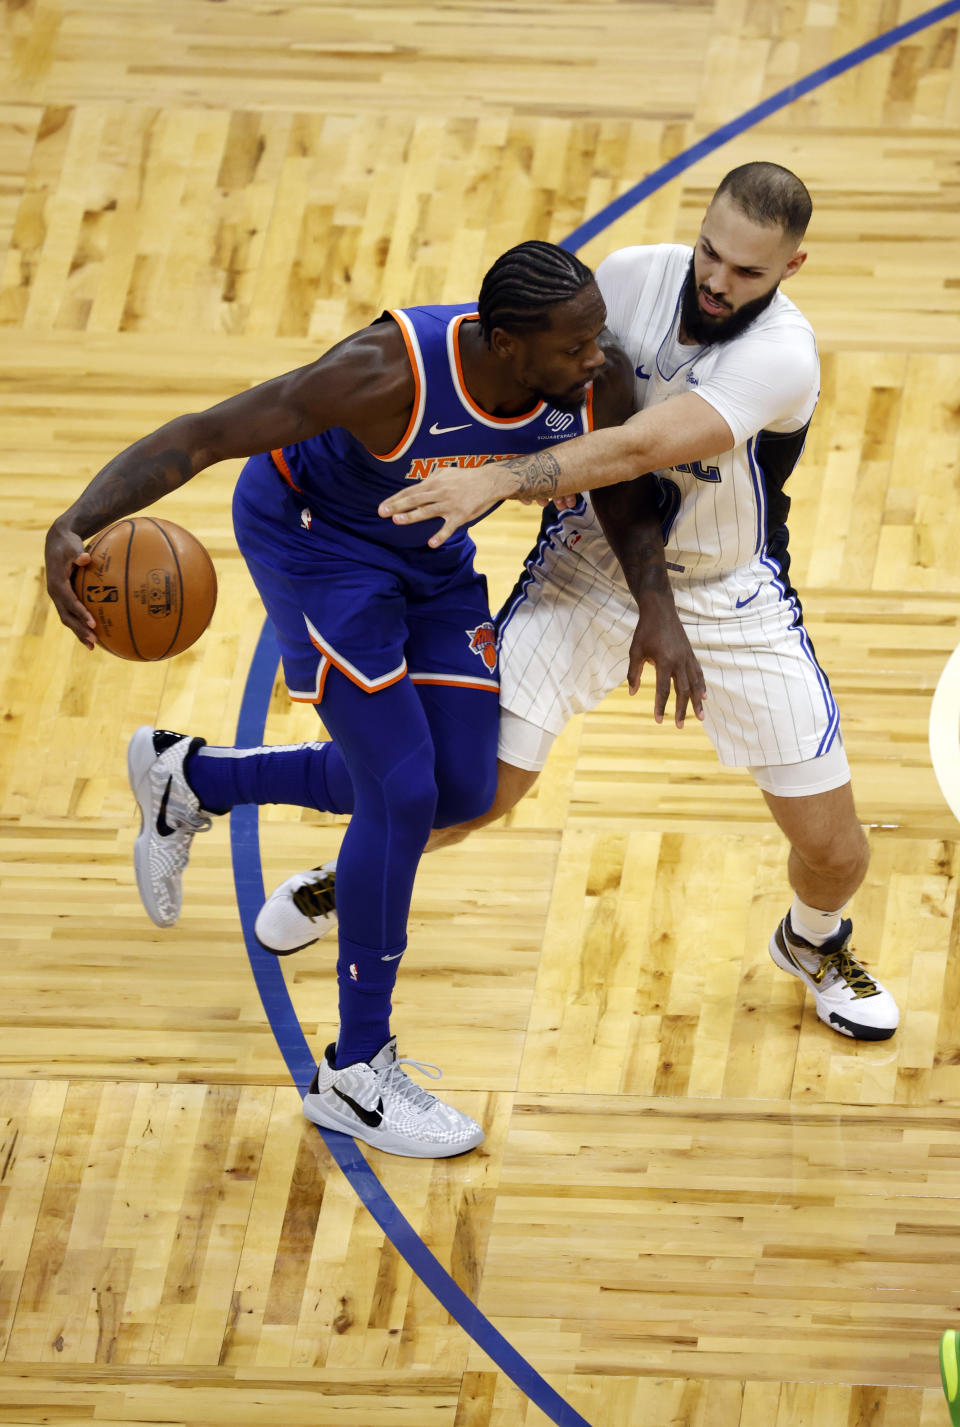 Feb 17, 2021; Orlando, Florida, USA; New York Knicks forward Julius Randle (30) moves to the basket as Orlando Magic guard Evan Fournier (10) defends during the first quarter at Amway Center. Mandatory Credit: Kim Klement-USA TODAY Sports